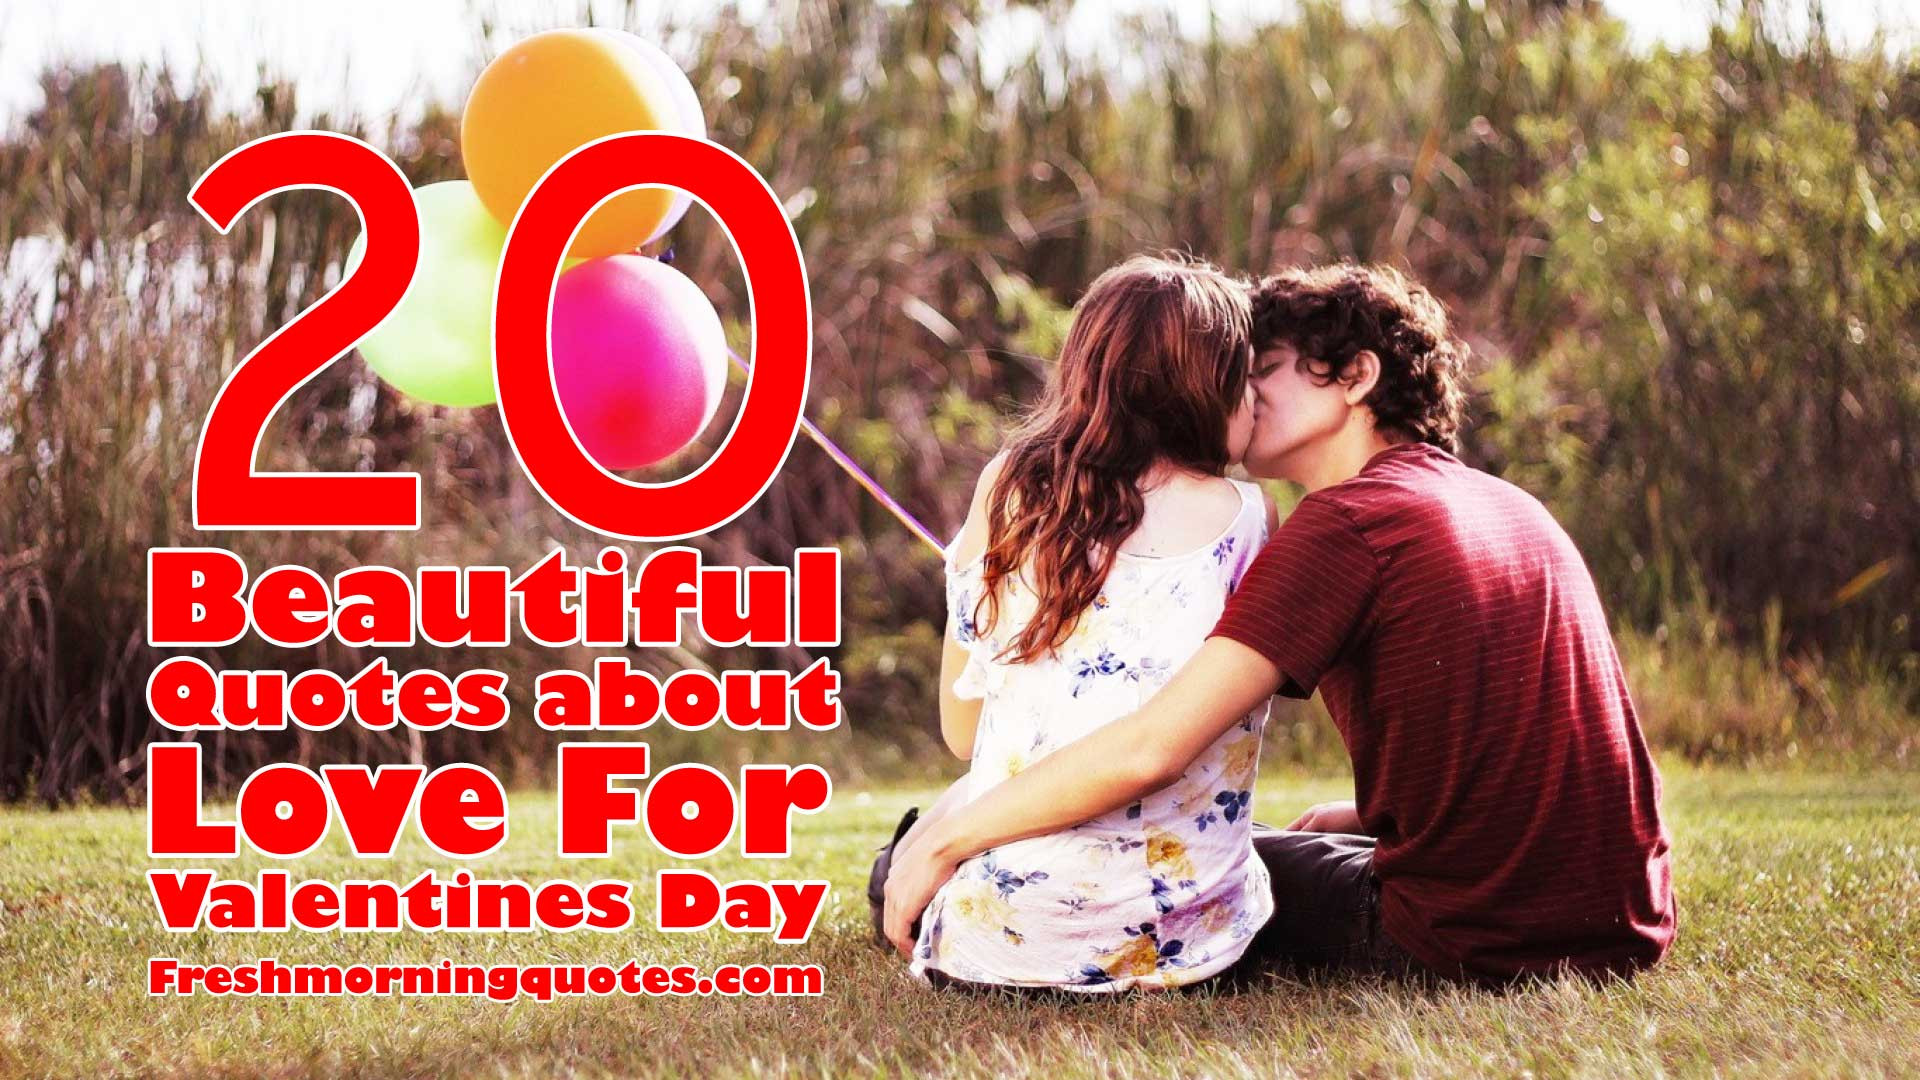 Valentines Day Love Quotes
 20 Beautiful Quotes about Love for Valentines Day